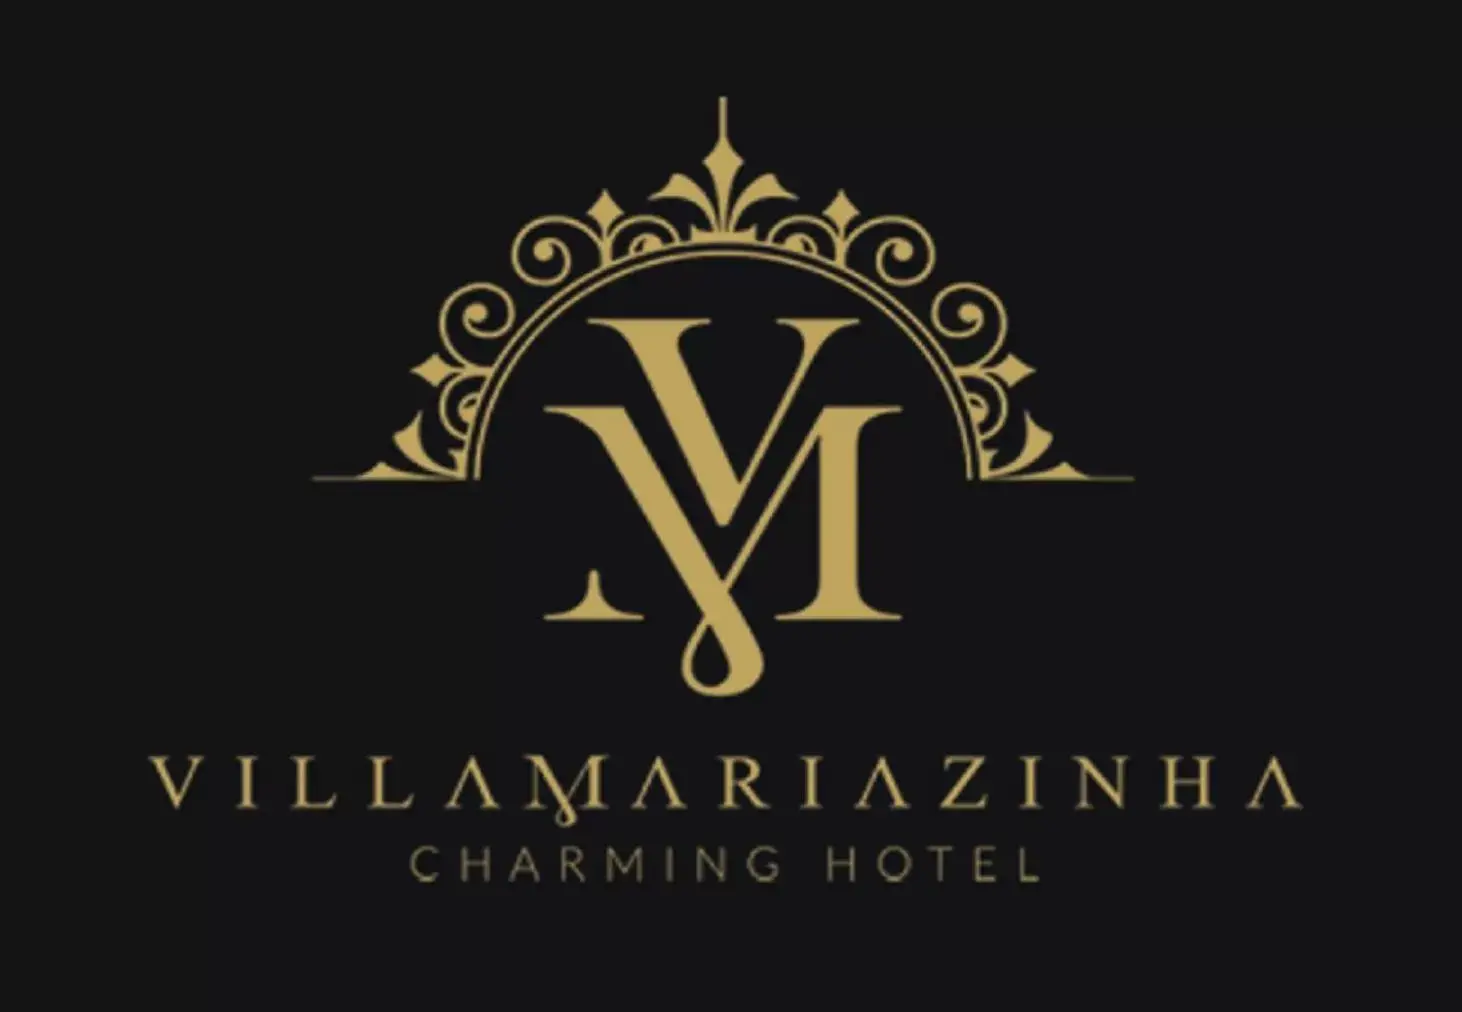 Property logo or sign, Property Logo/Sign in Villa Mariazinha Charming Hotel